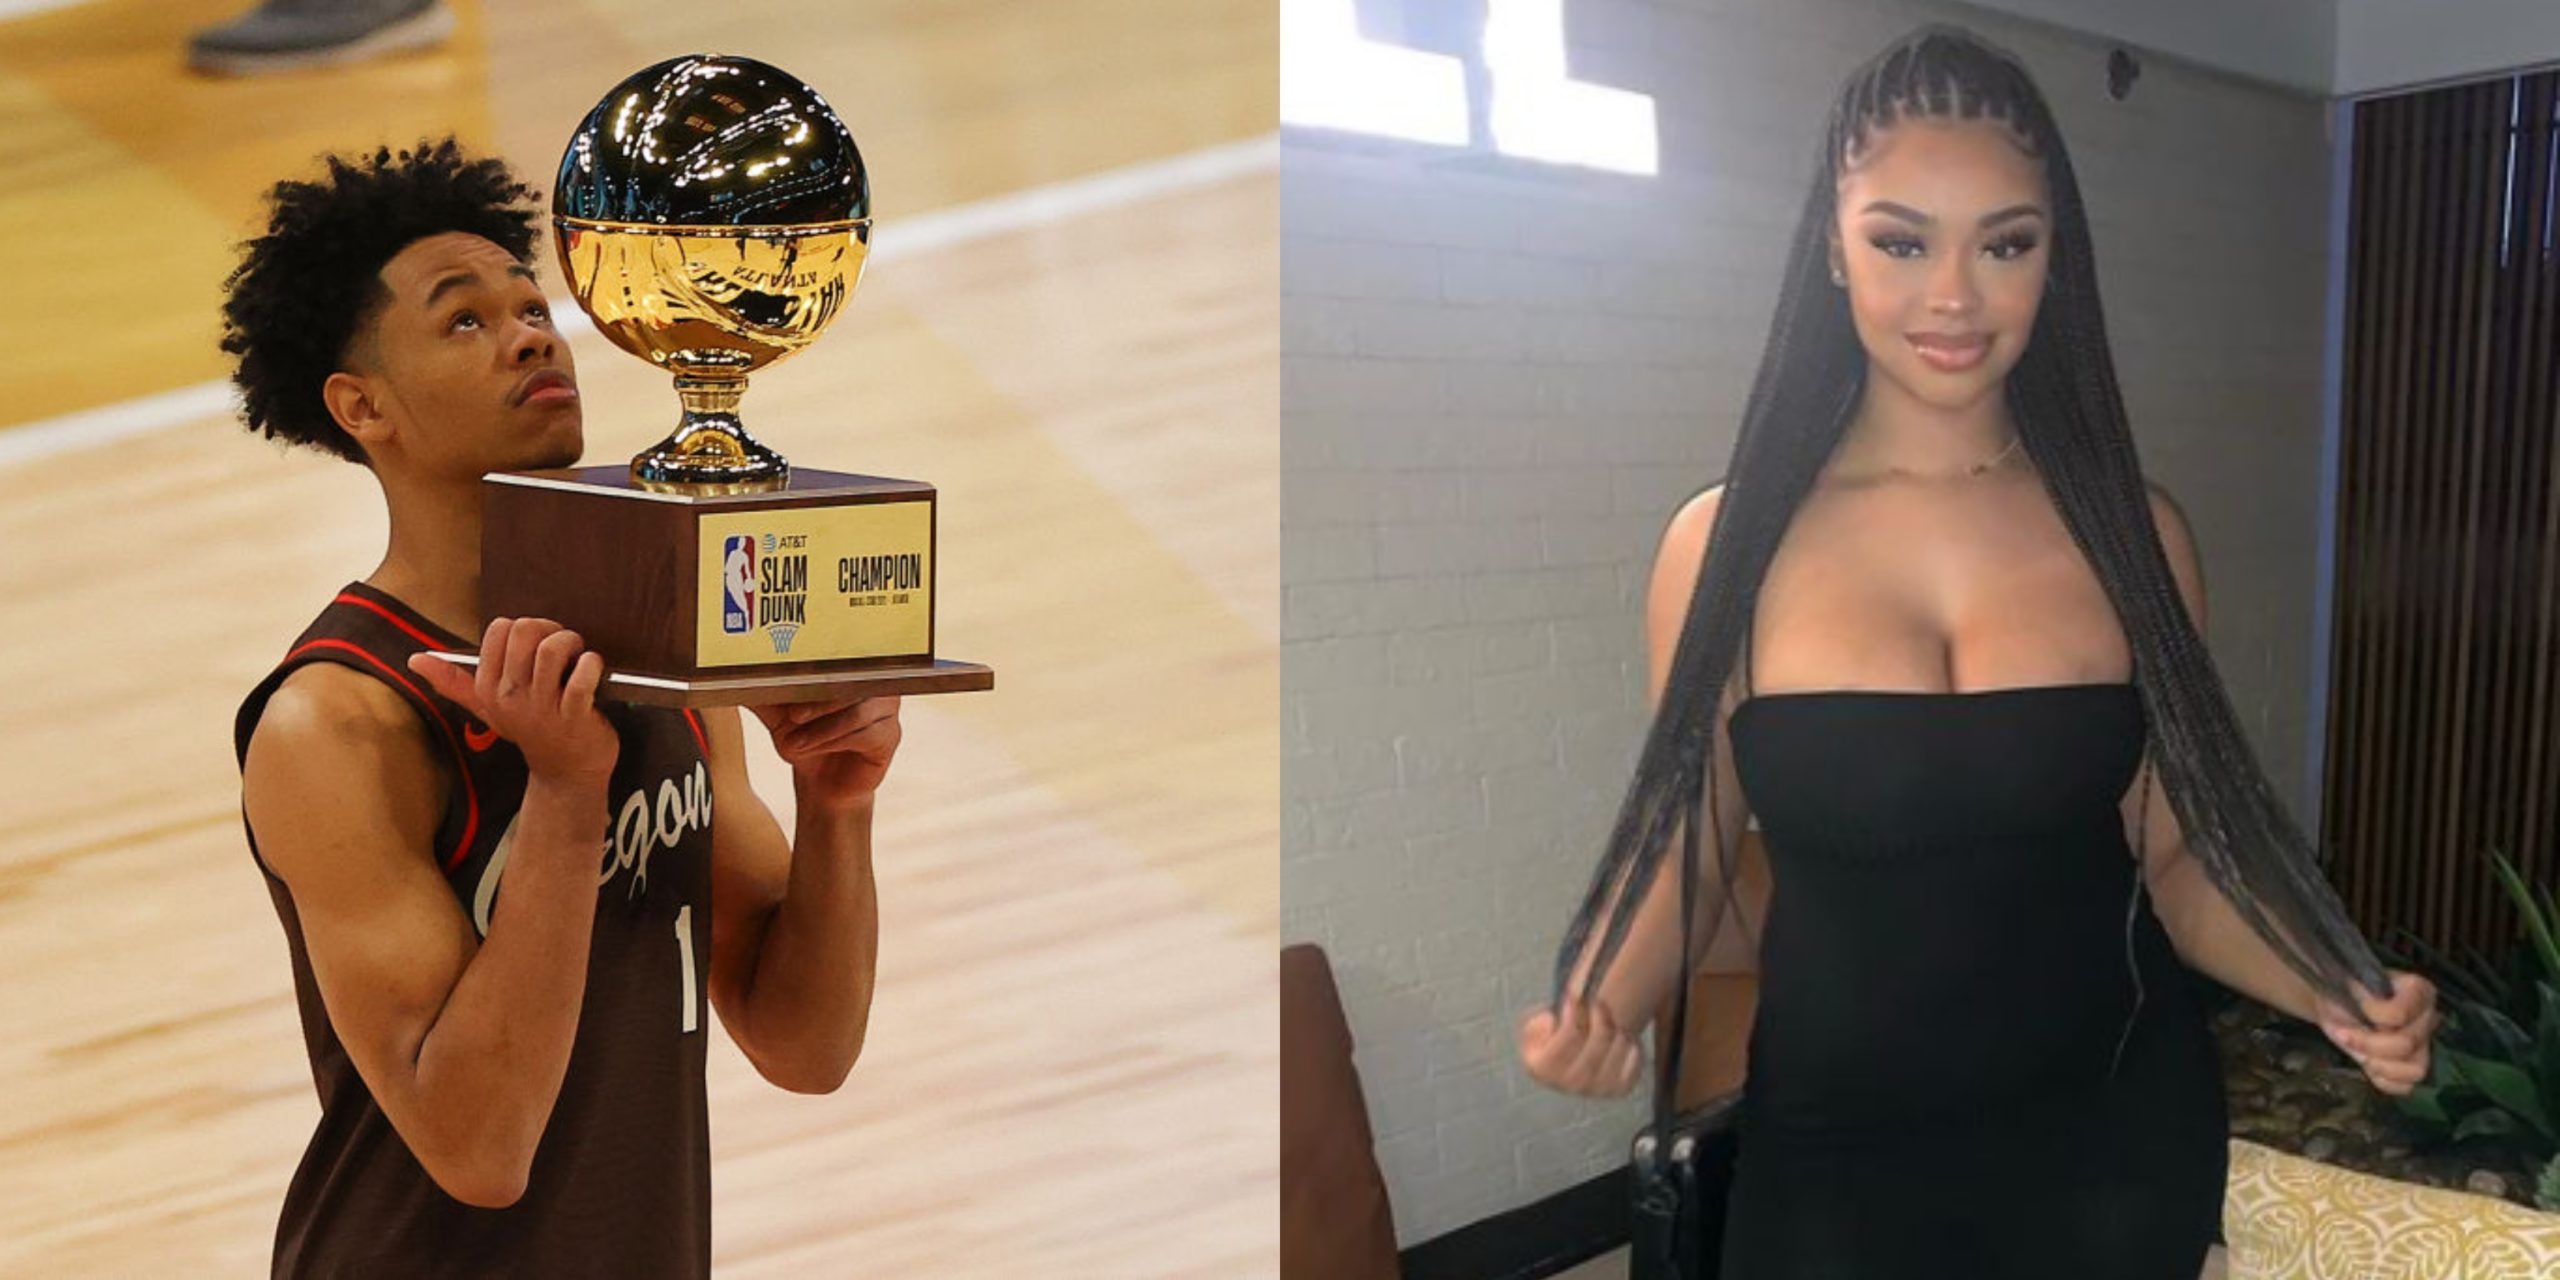 Anfernee Simons Girlfriend Gets Blasted For Being A Gold Digger After He Won Slam Dunk Contest